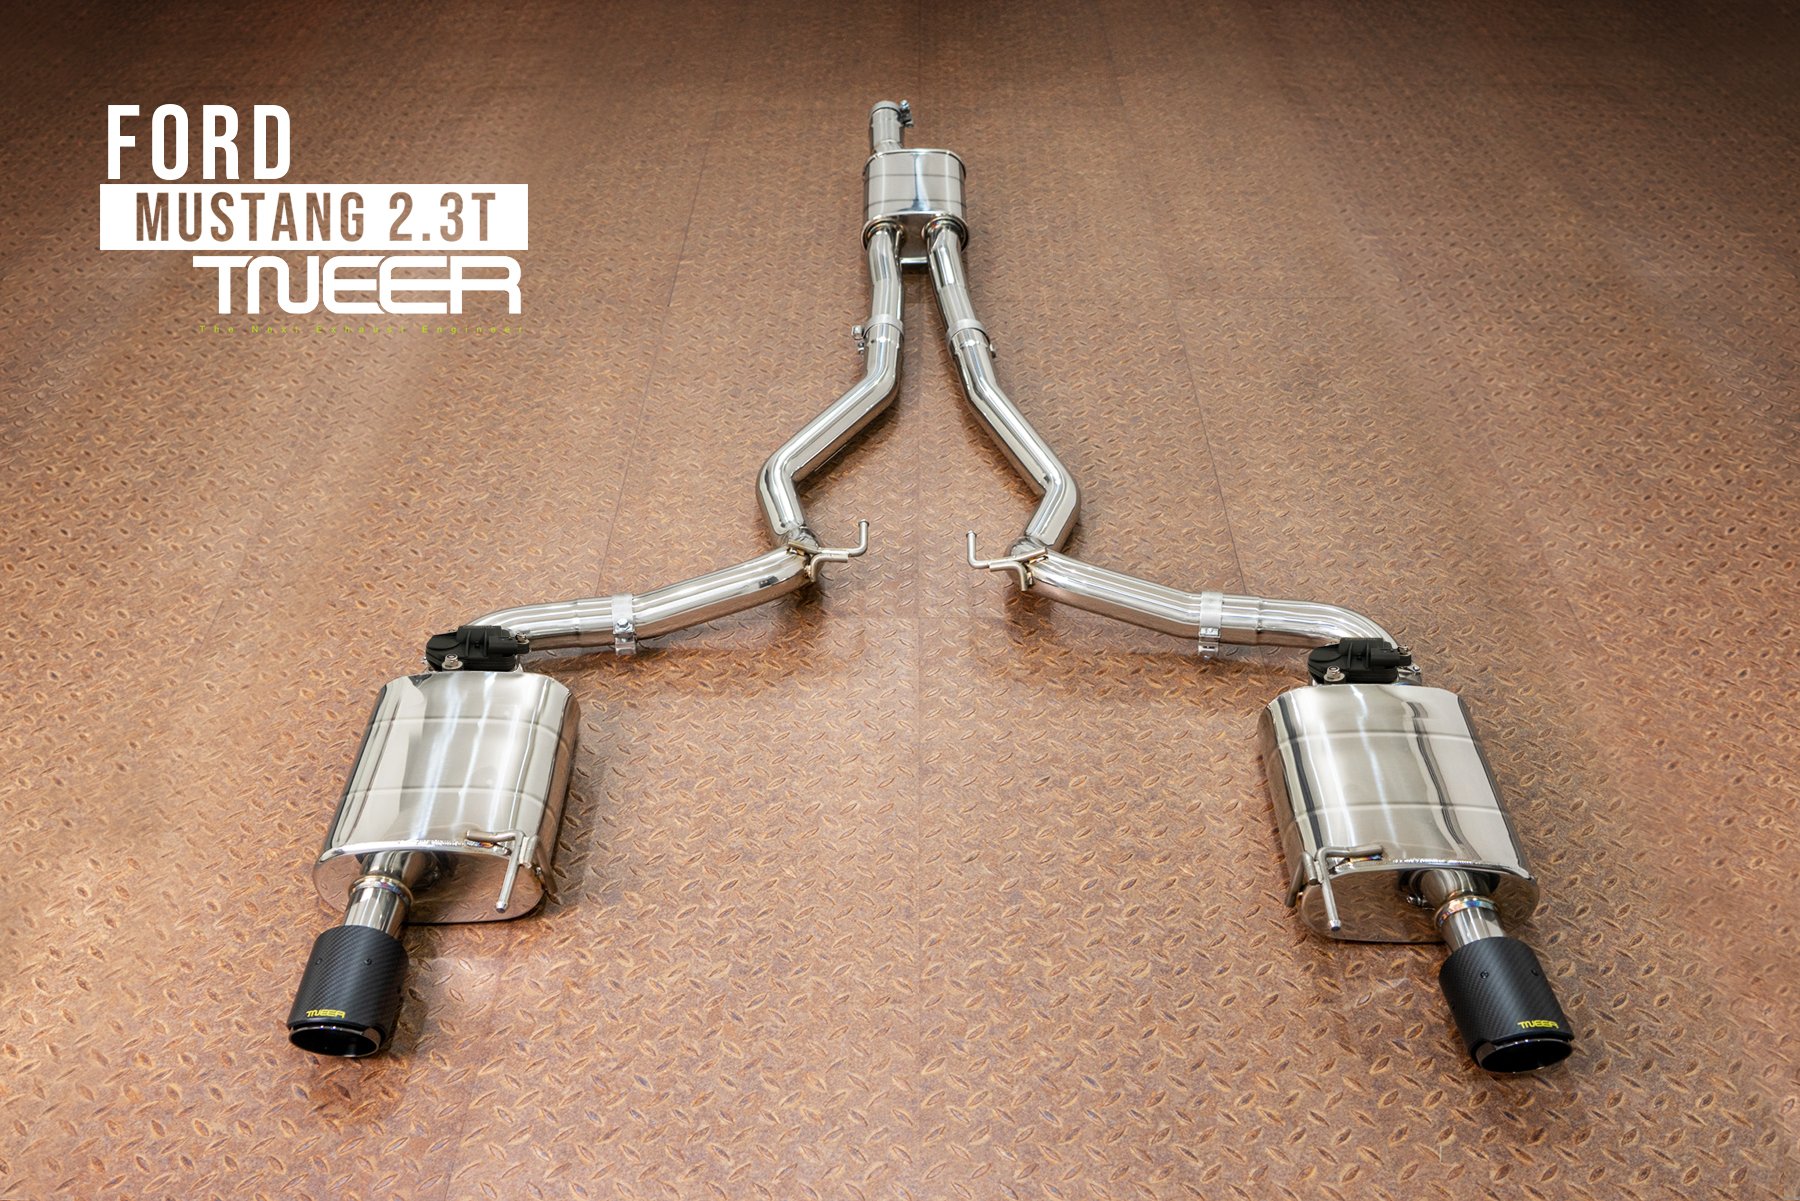 BMW G82 M4 TNEER Exhaust System with Quad Silver Tips